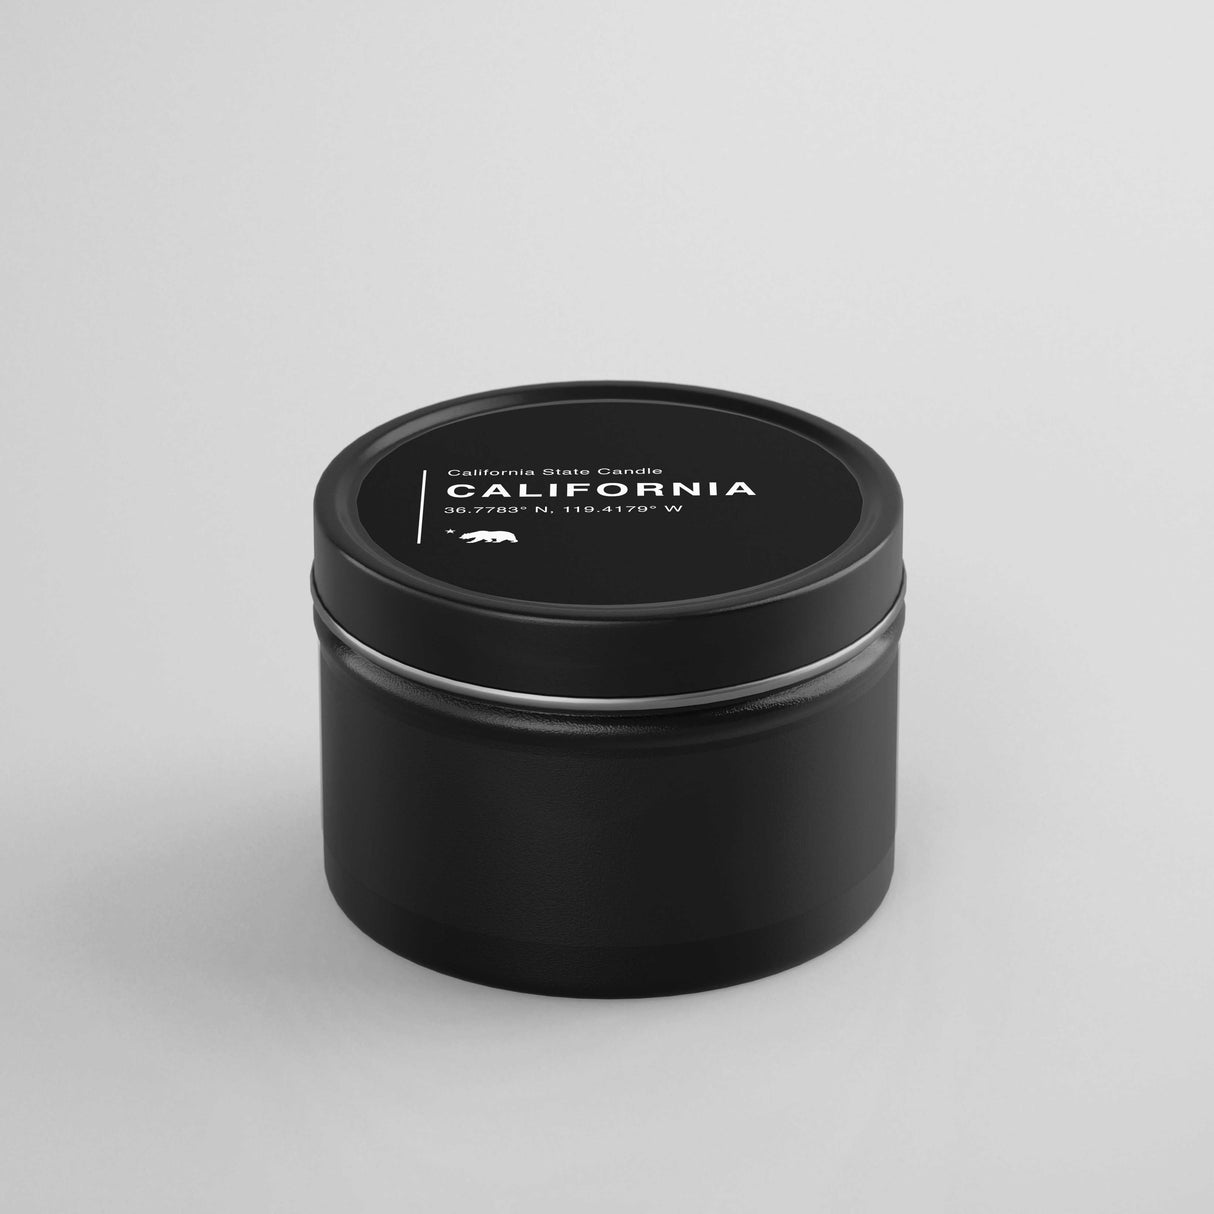 California Scented Travel Tin Candle